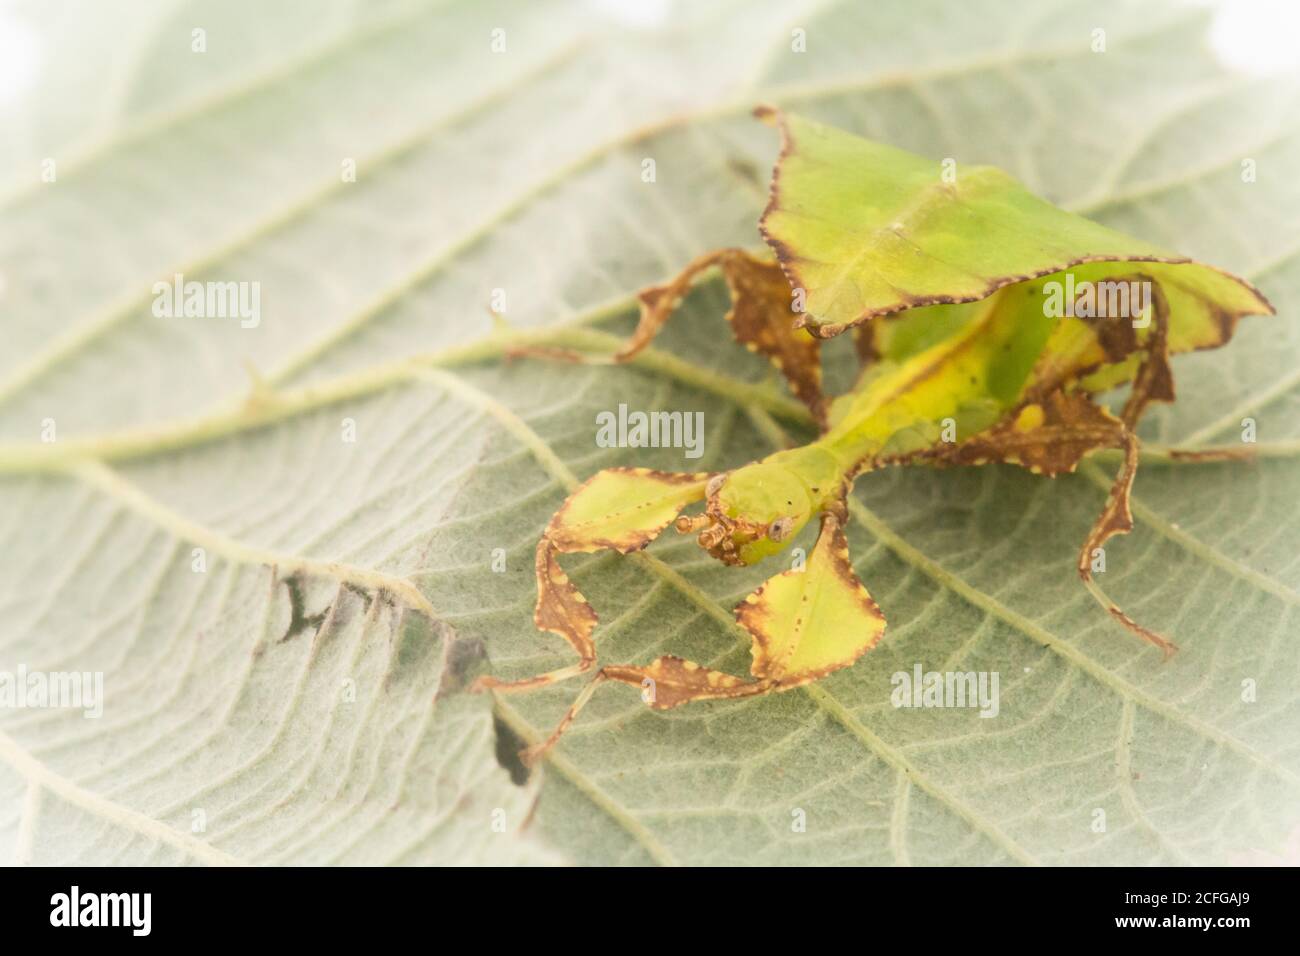 A young giant leaf insect (Phyllium giganteum) waits on the bramble leaf that is eats Stock Photo